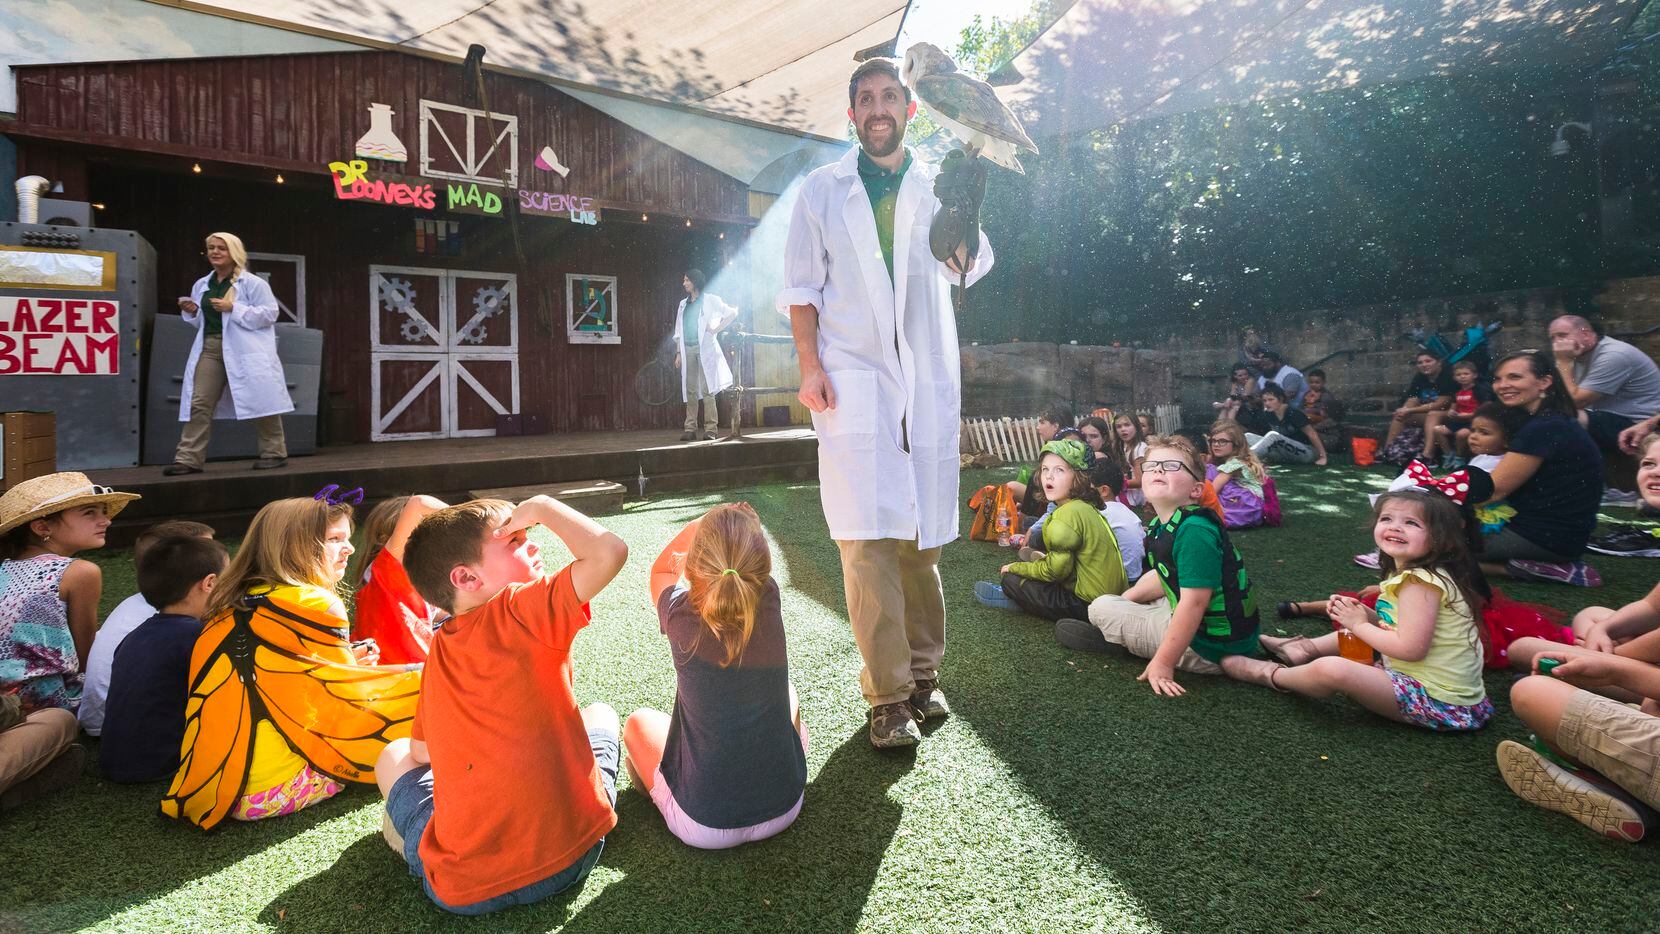 Fort Worth Zoo's annual Halloween celebration, Boo at the Zoo, will include trick-or-treating, a live animal stage show and more fun activities. Photo by Jeremy Enlow